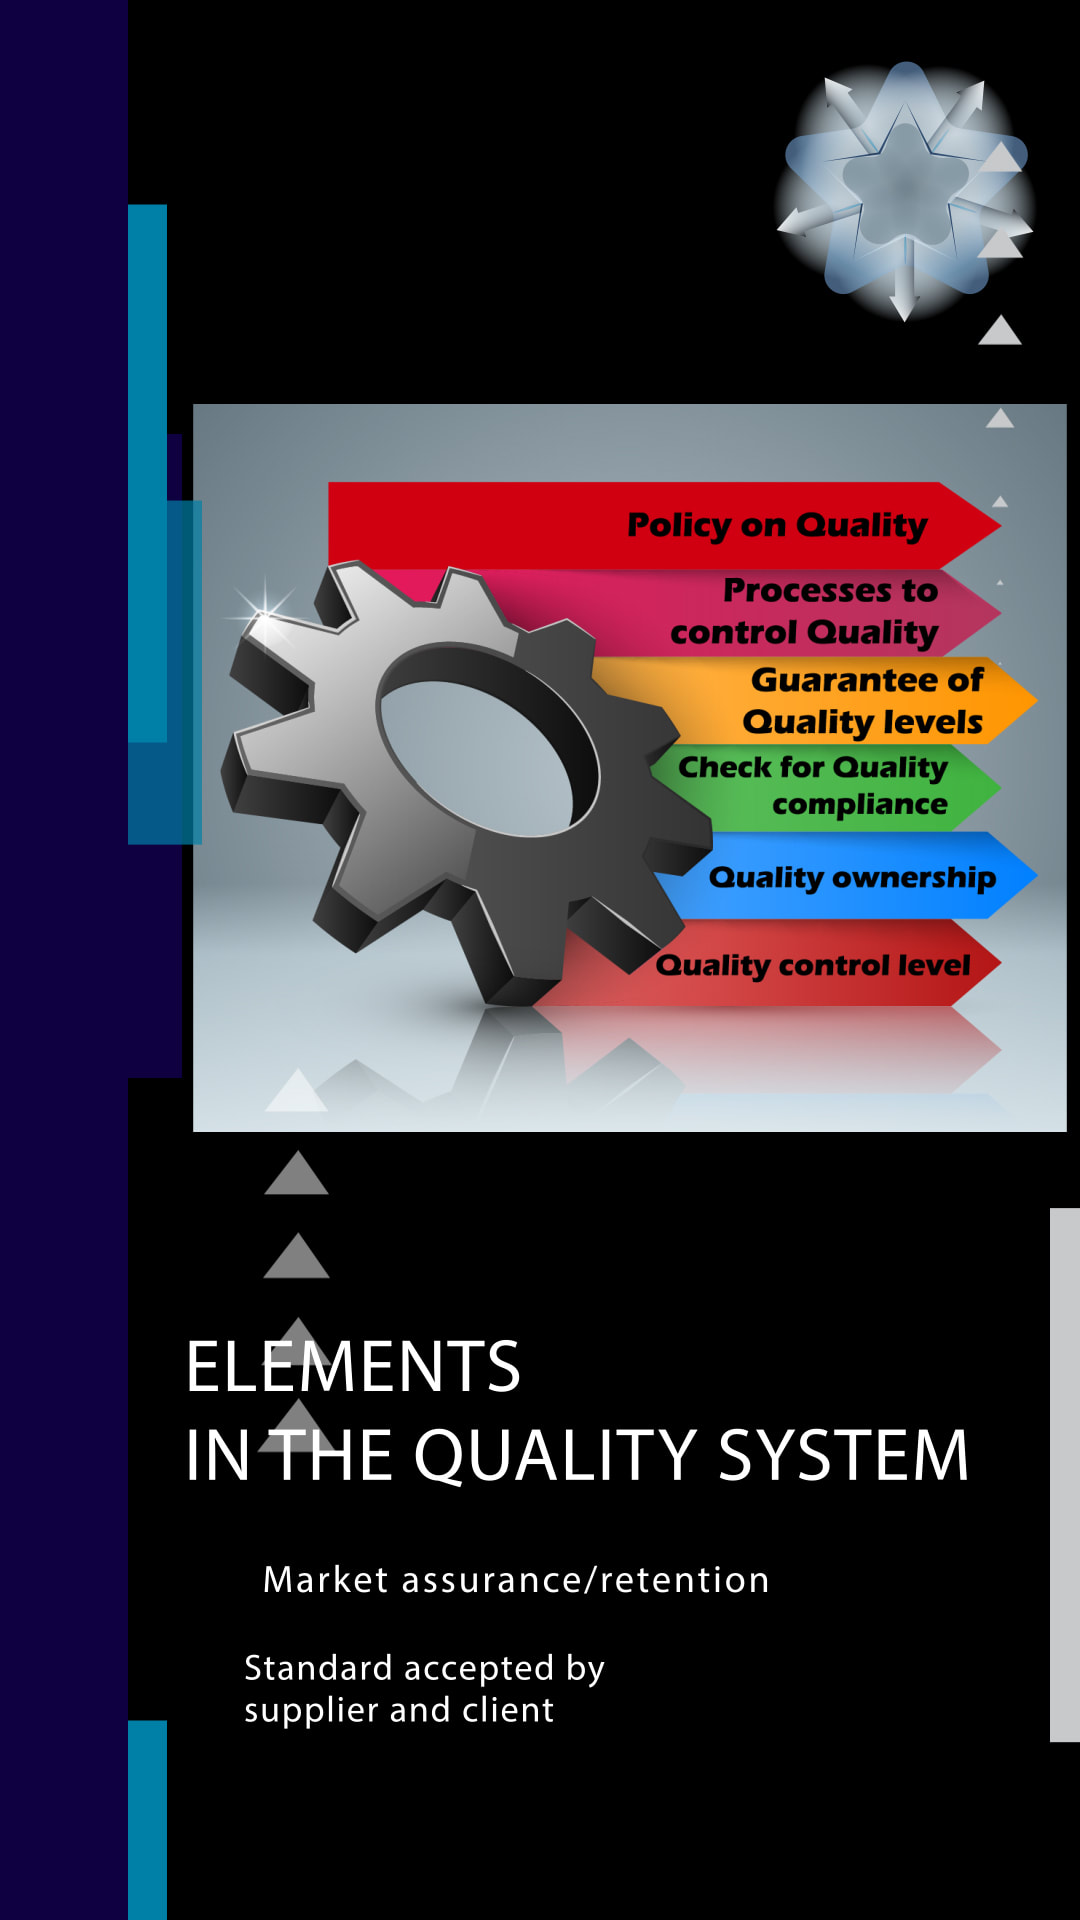 Policy on Quality is essential